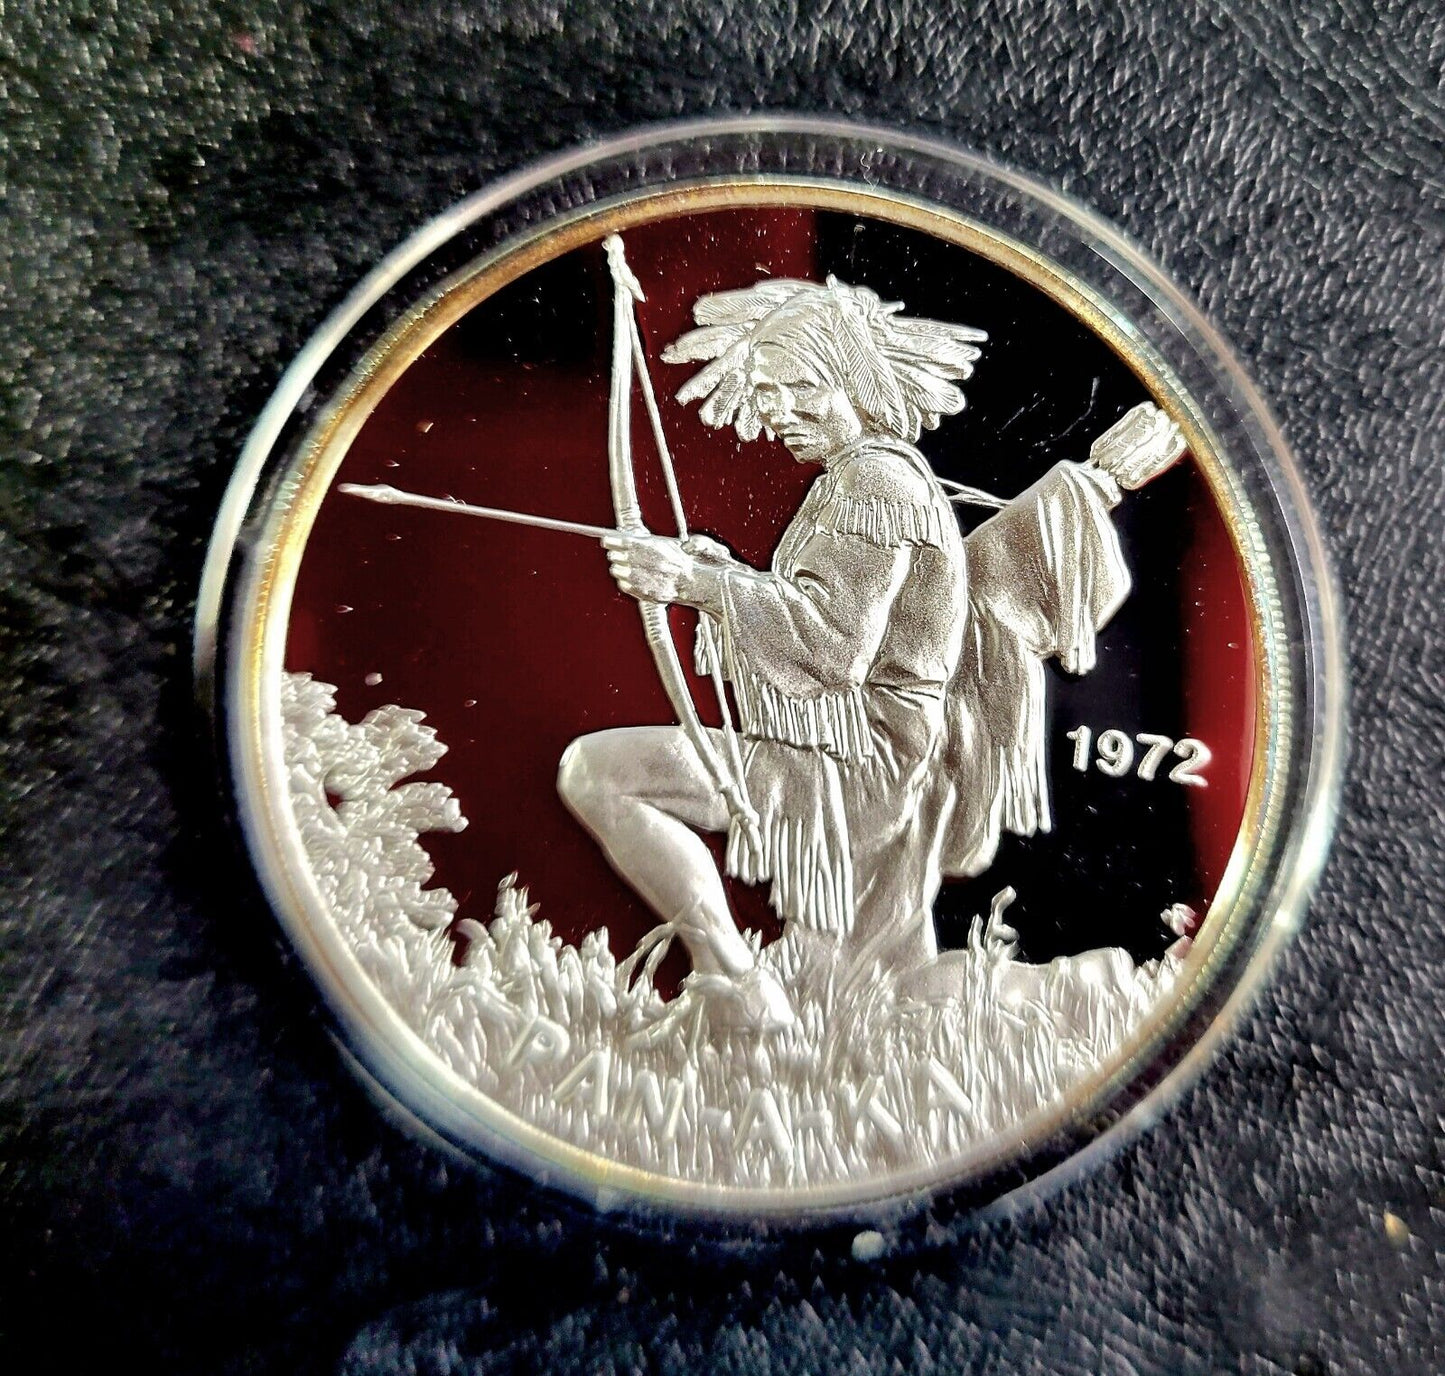 Sovereign Nation of The Paiute Tribe Native American 999 Silver Franklin Mint